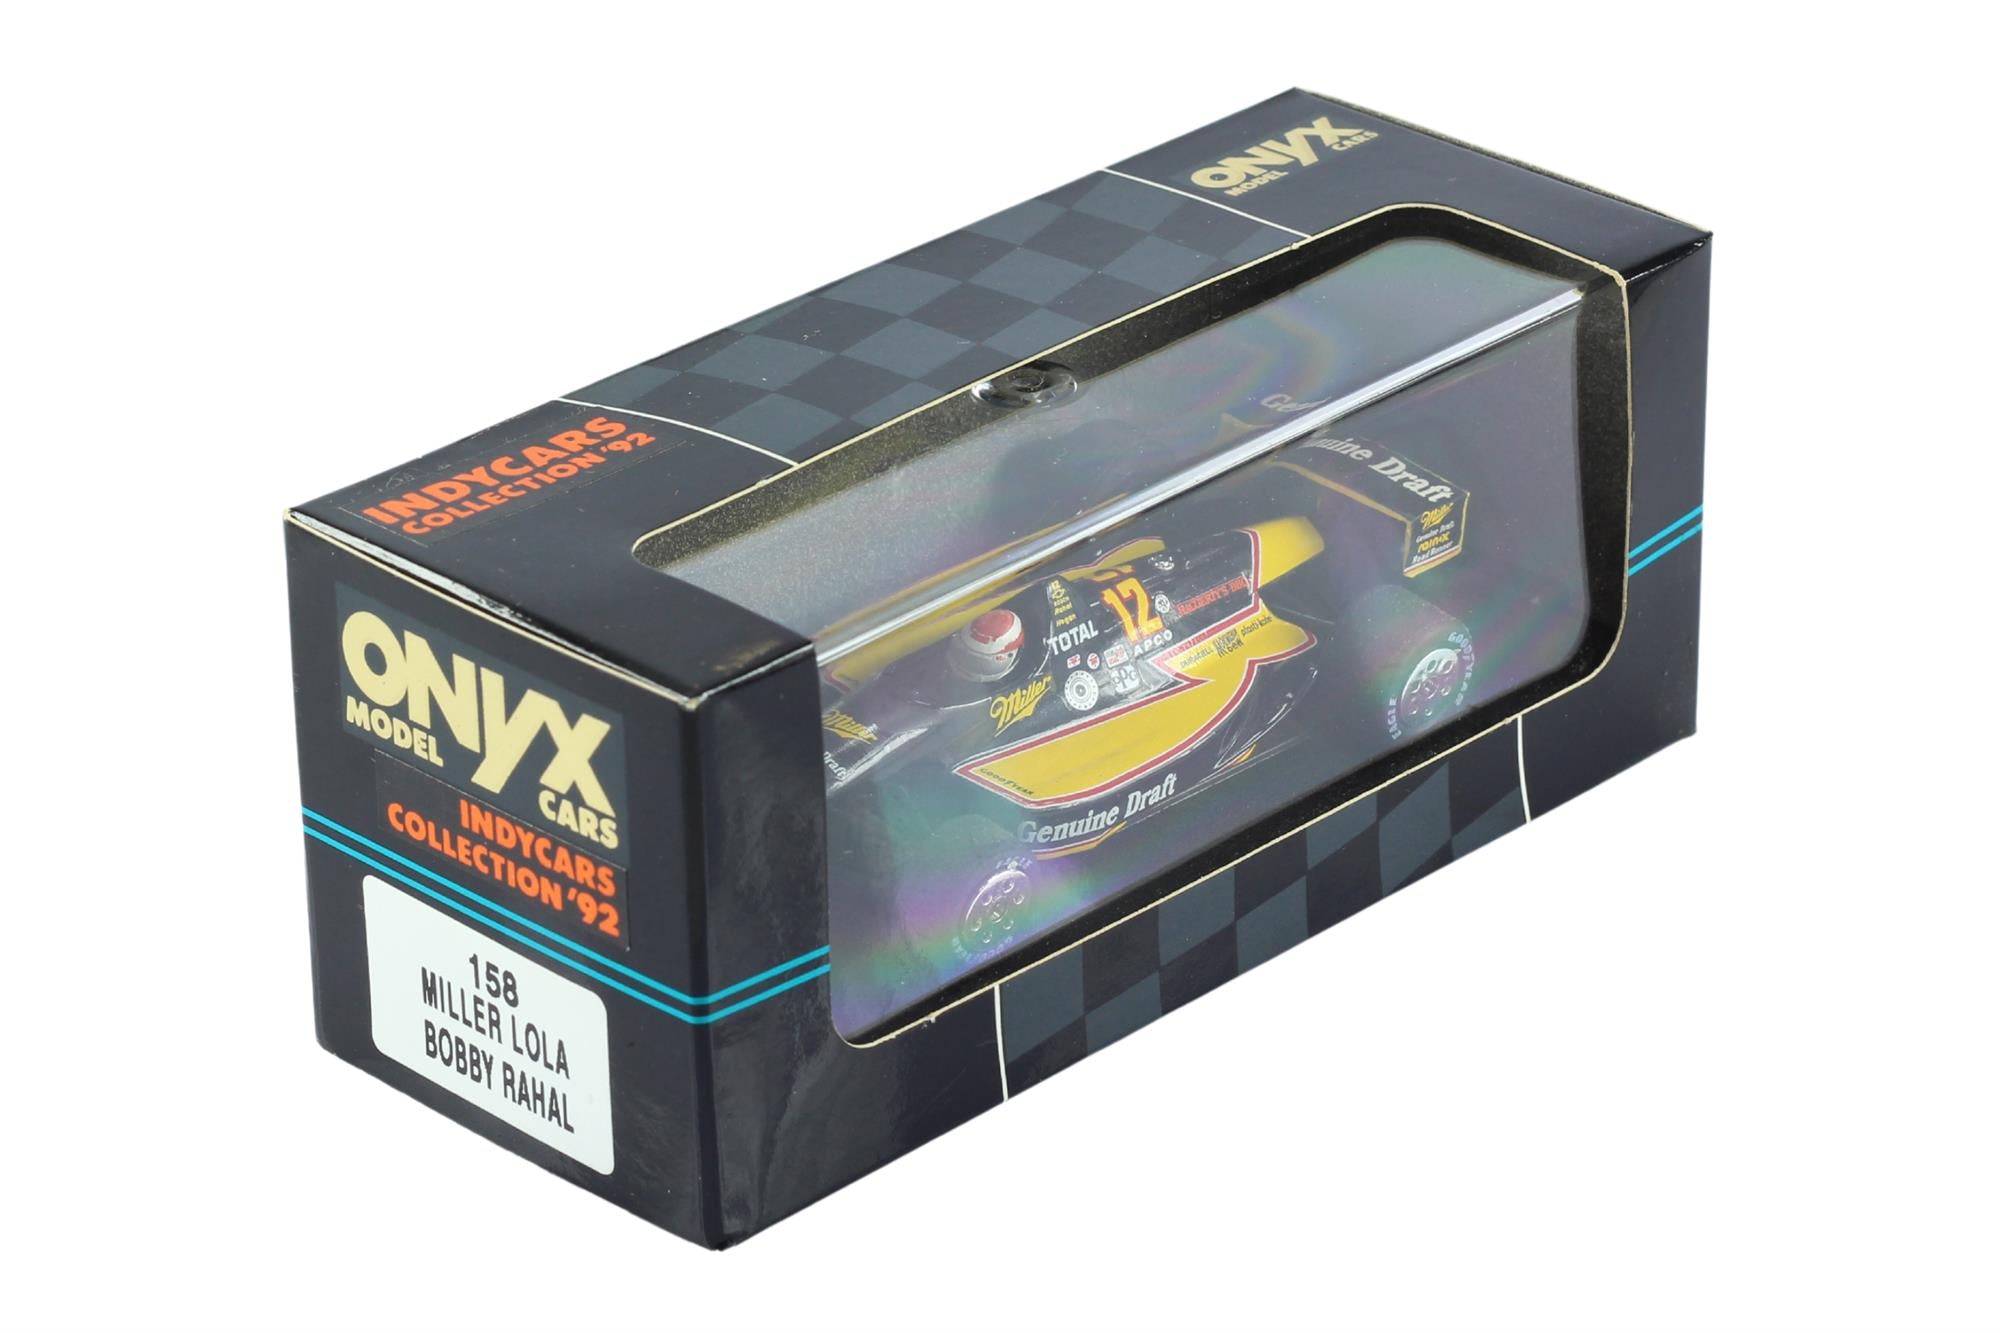 Onyx Models - 1:43 Scale Diecast Indycars Collection 1992 - 158 Miller Lola - Bobby Rahal #12 - Toptoys2u